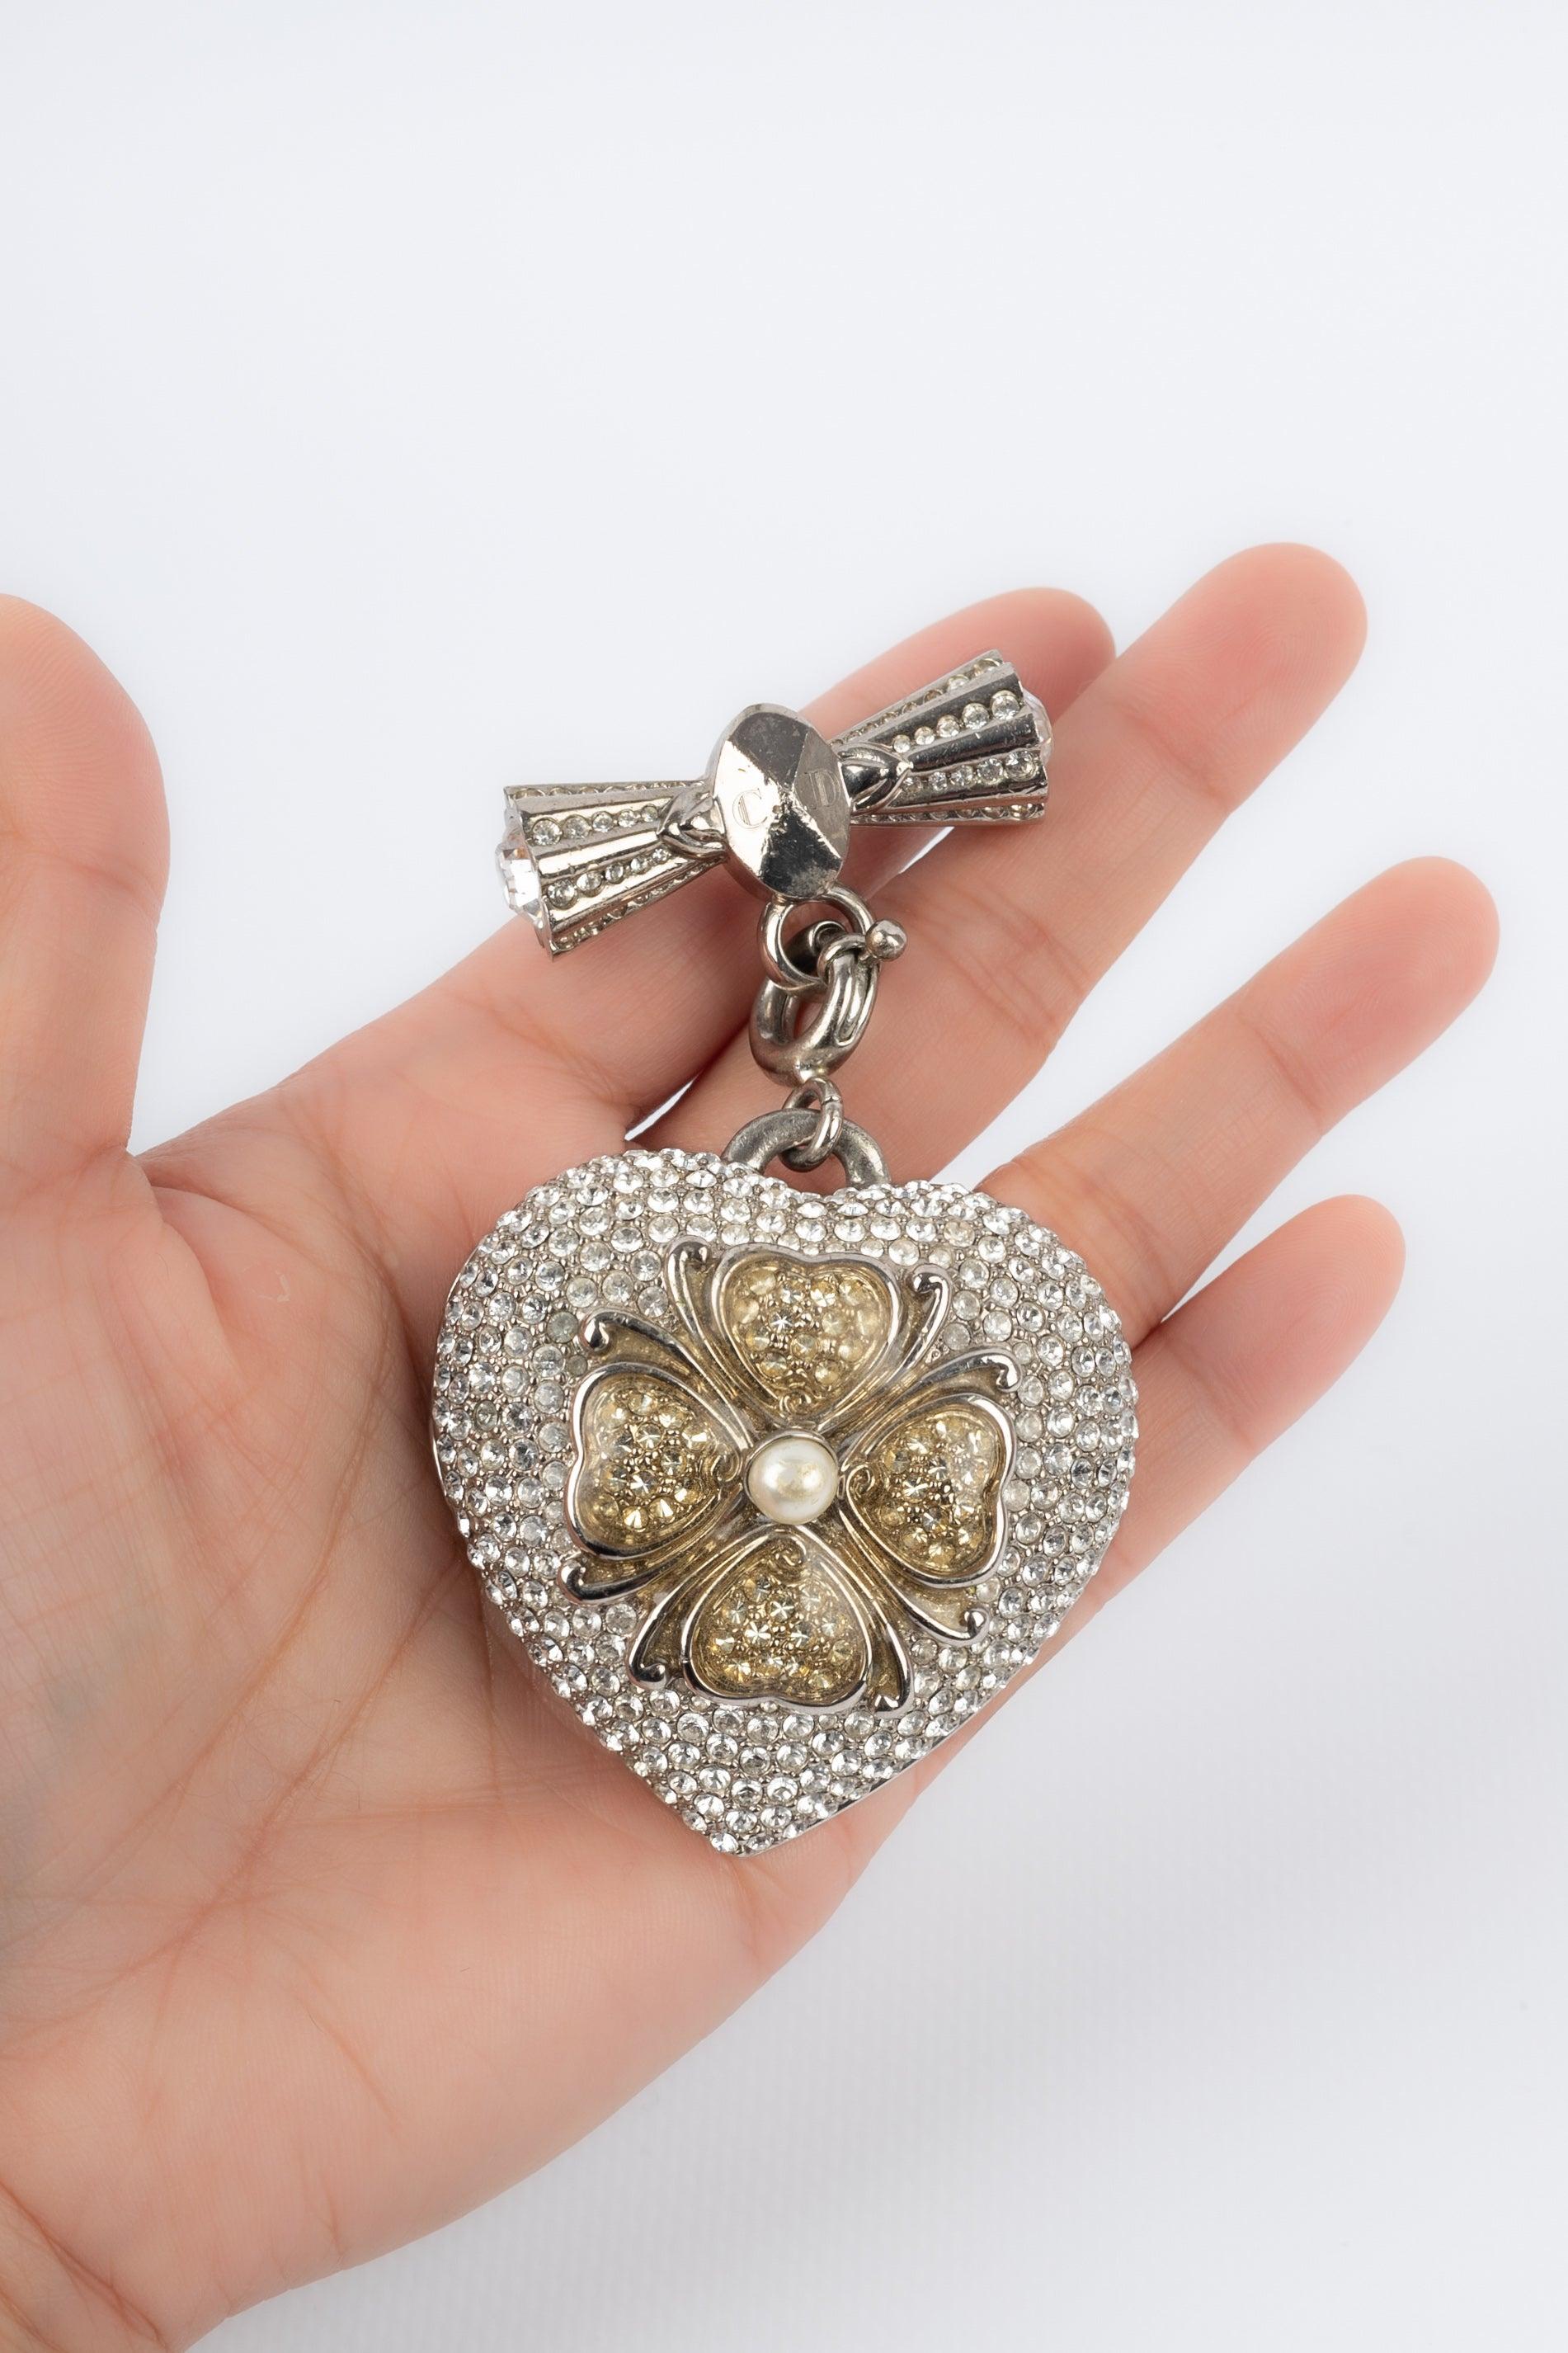 Dior- Silvery metal brooch with rhinestones representing a heart topped with a four-leaf clover. The pendant contains a mirror. To be mentioned, some scratches on the metal.

Additional information:
Condition: Good condition
Dimensions: 8.5 cm x 5.5